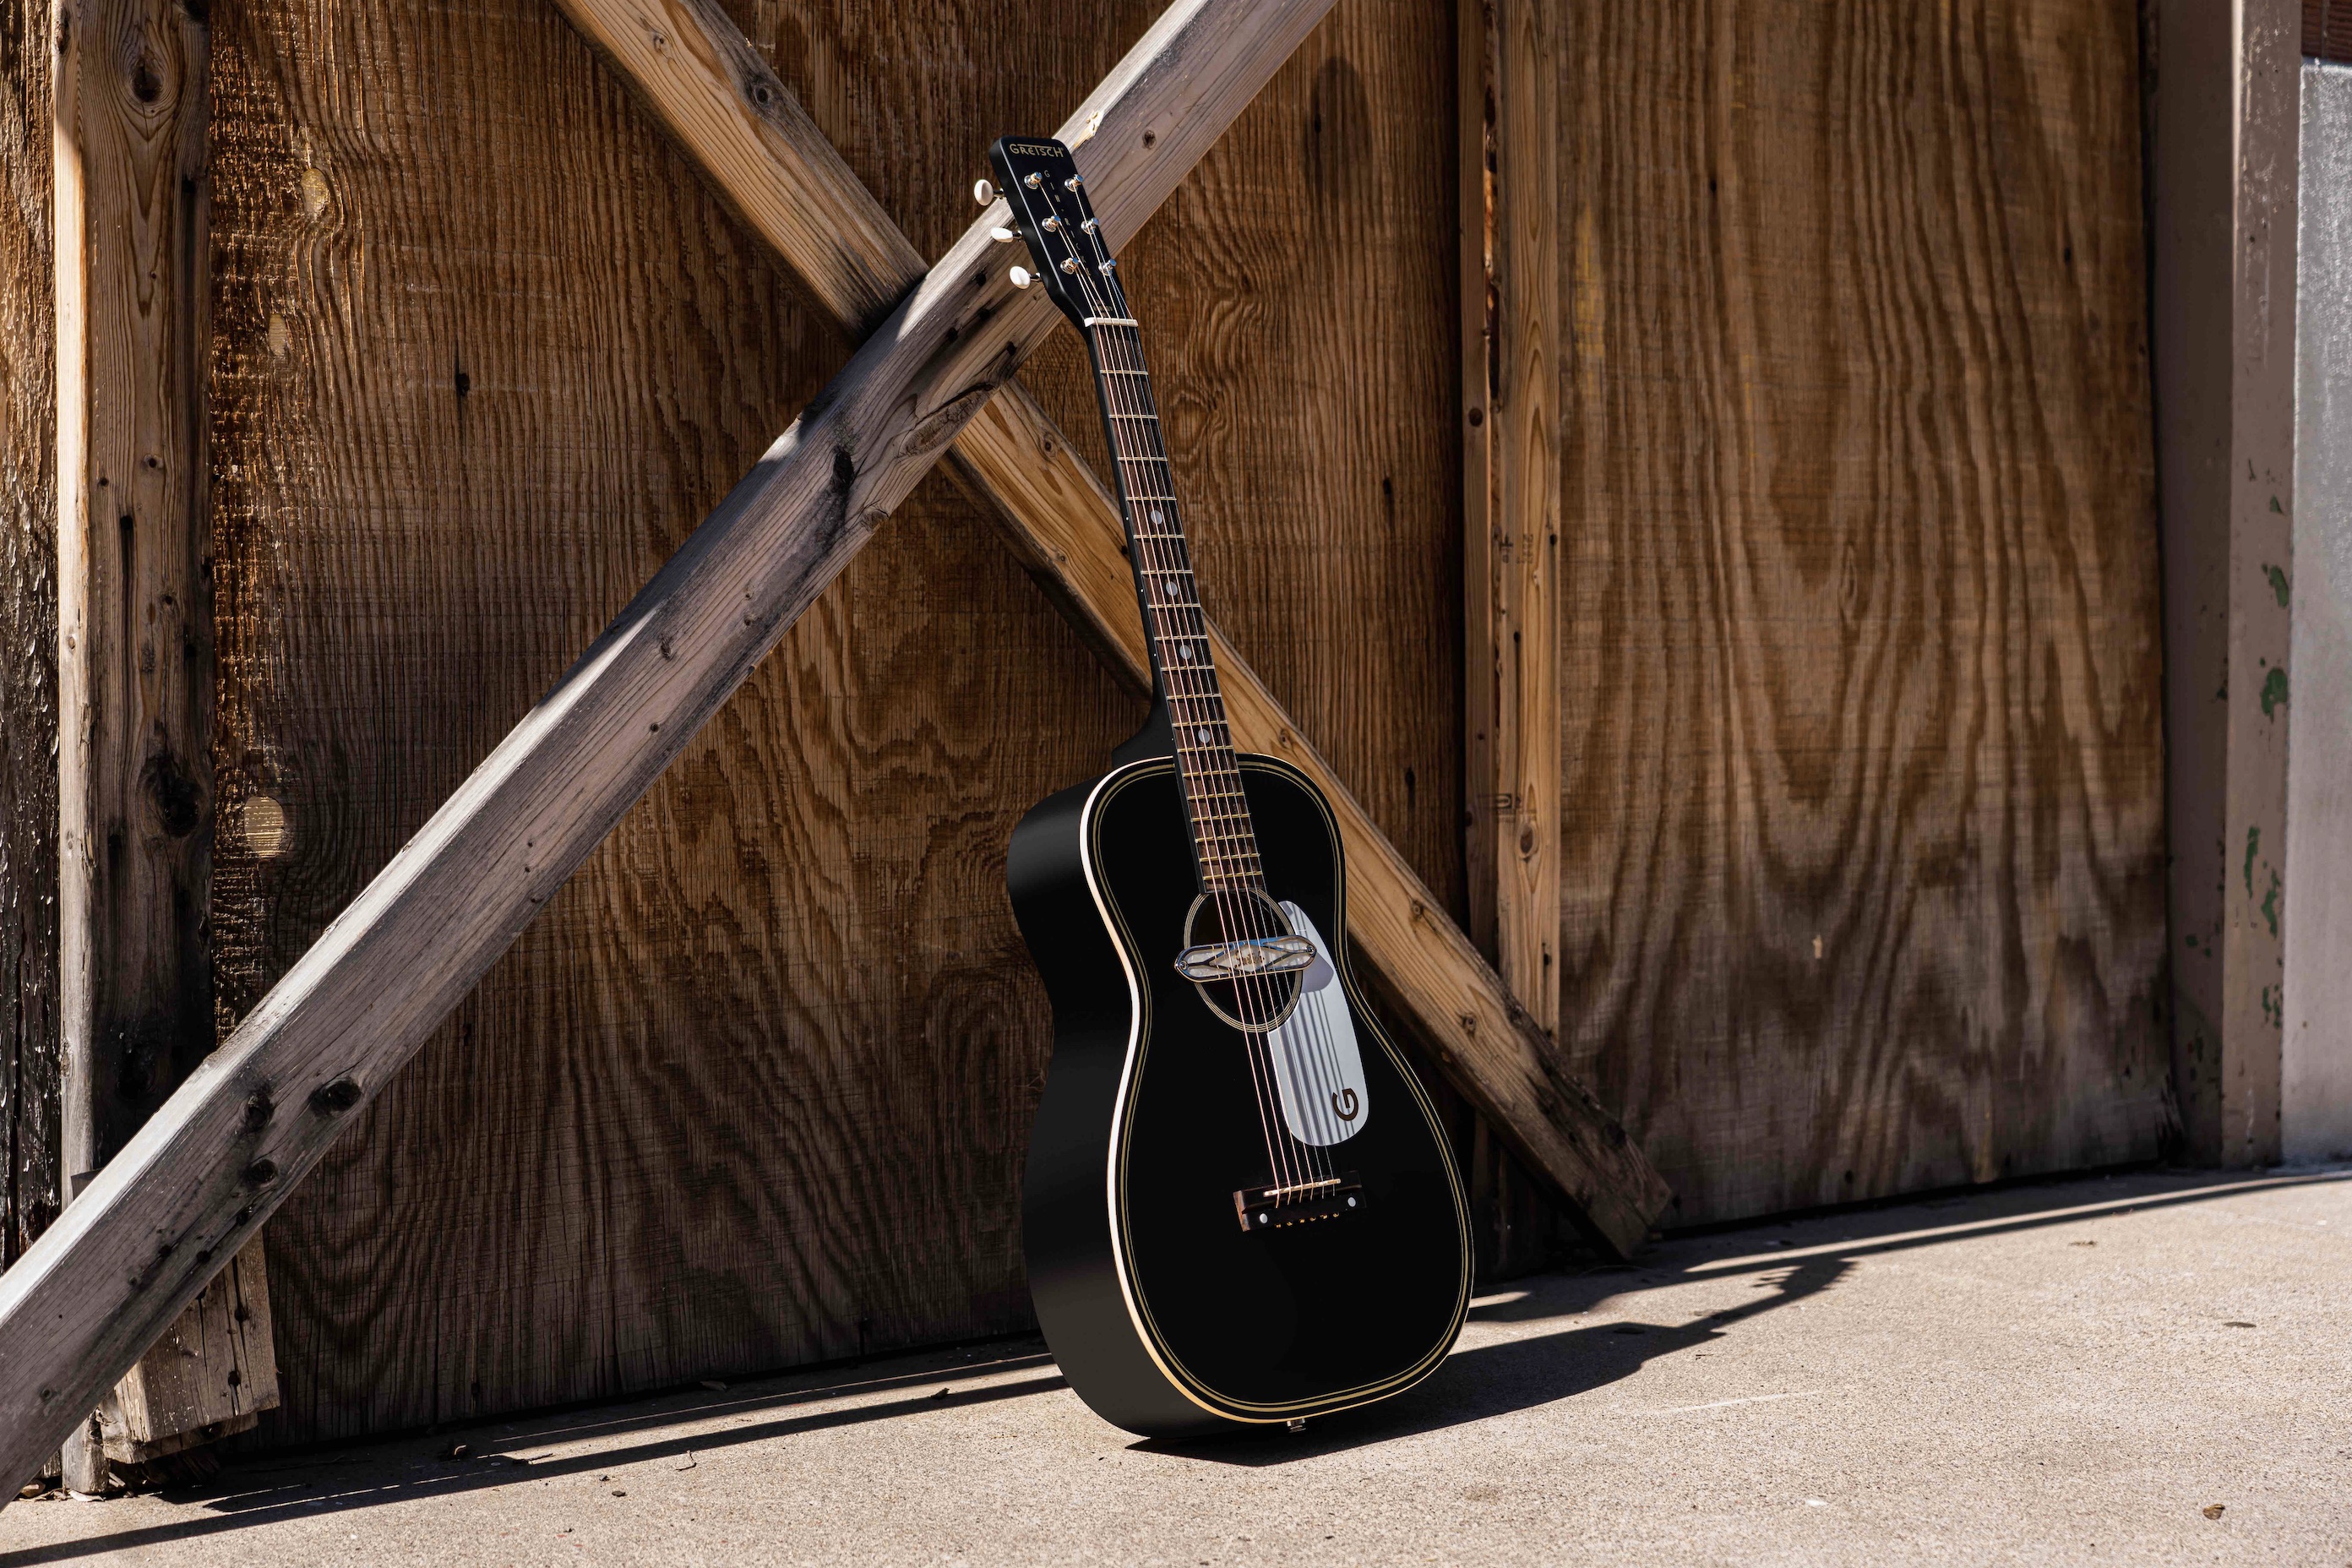 Gretsch Announces The All New G9520e Gin Rickey Acoustic Electric With Deltoluxe Soundhole Pickup And G9500 Limited Edition Jim Dandy Flat Top Musicplayers Com,Denver Steak Recipes